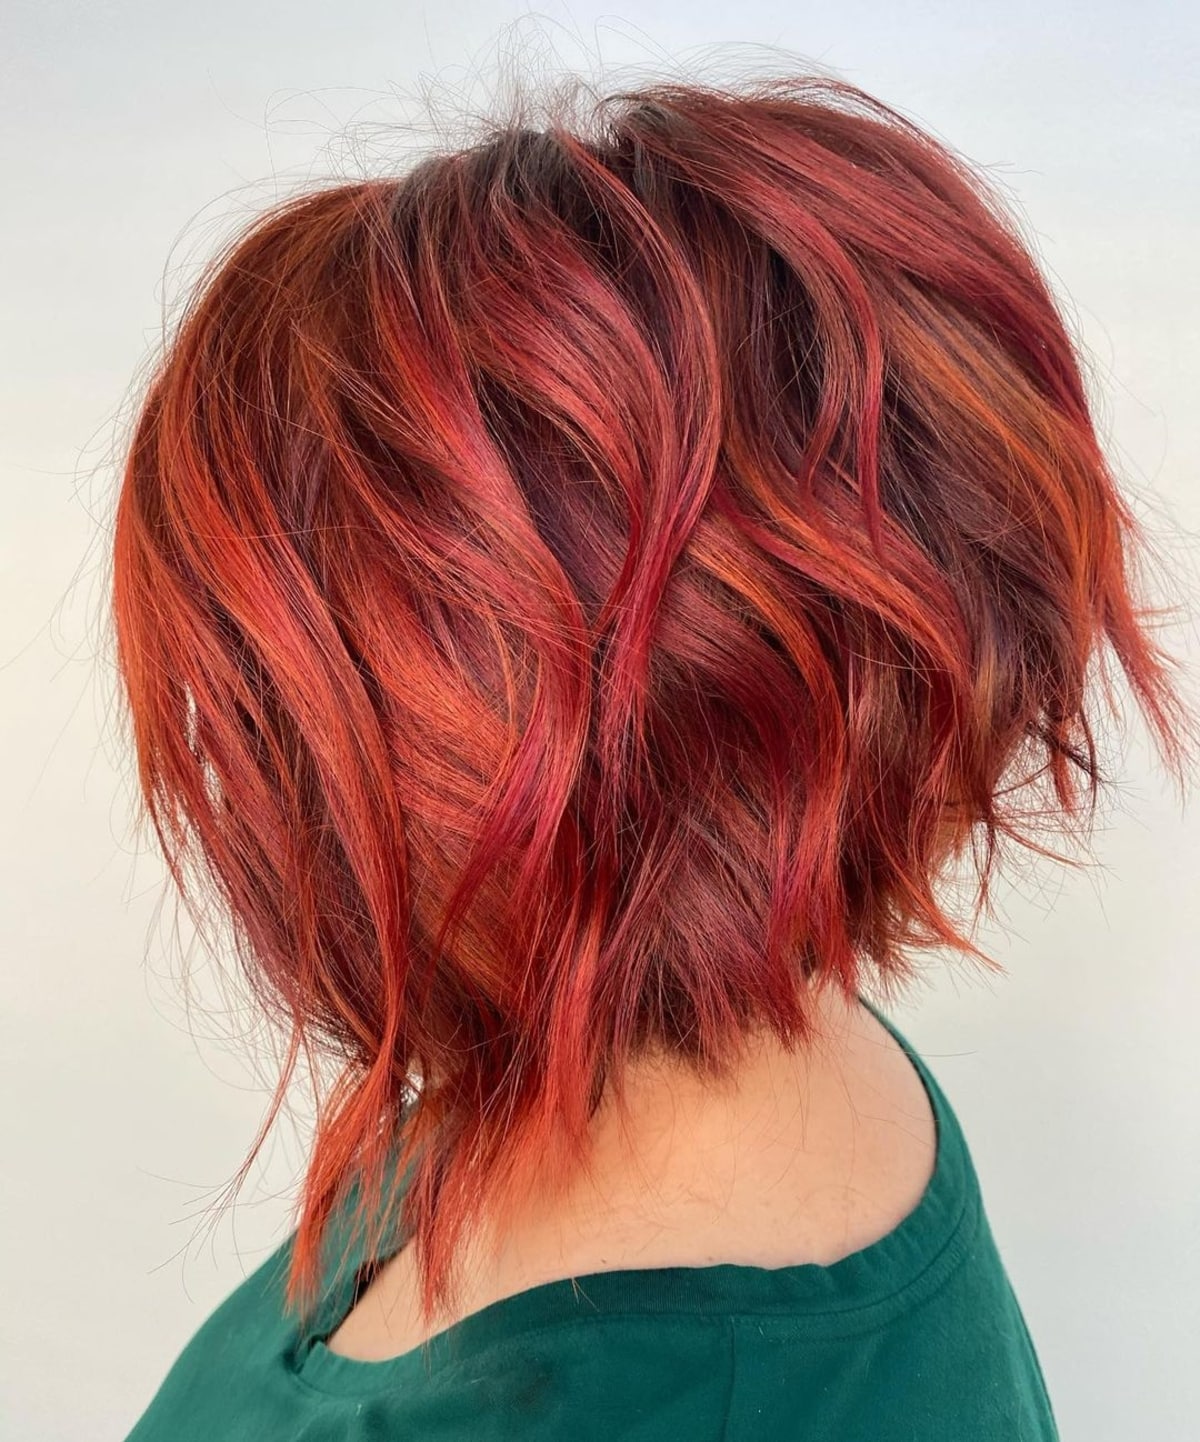 short and red angled asymmetrical bob